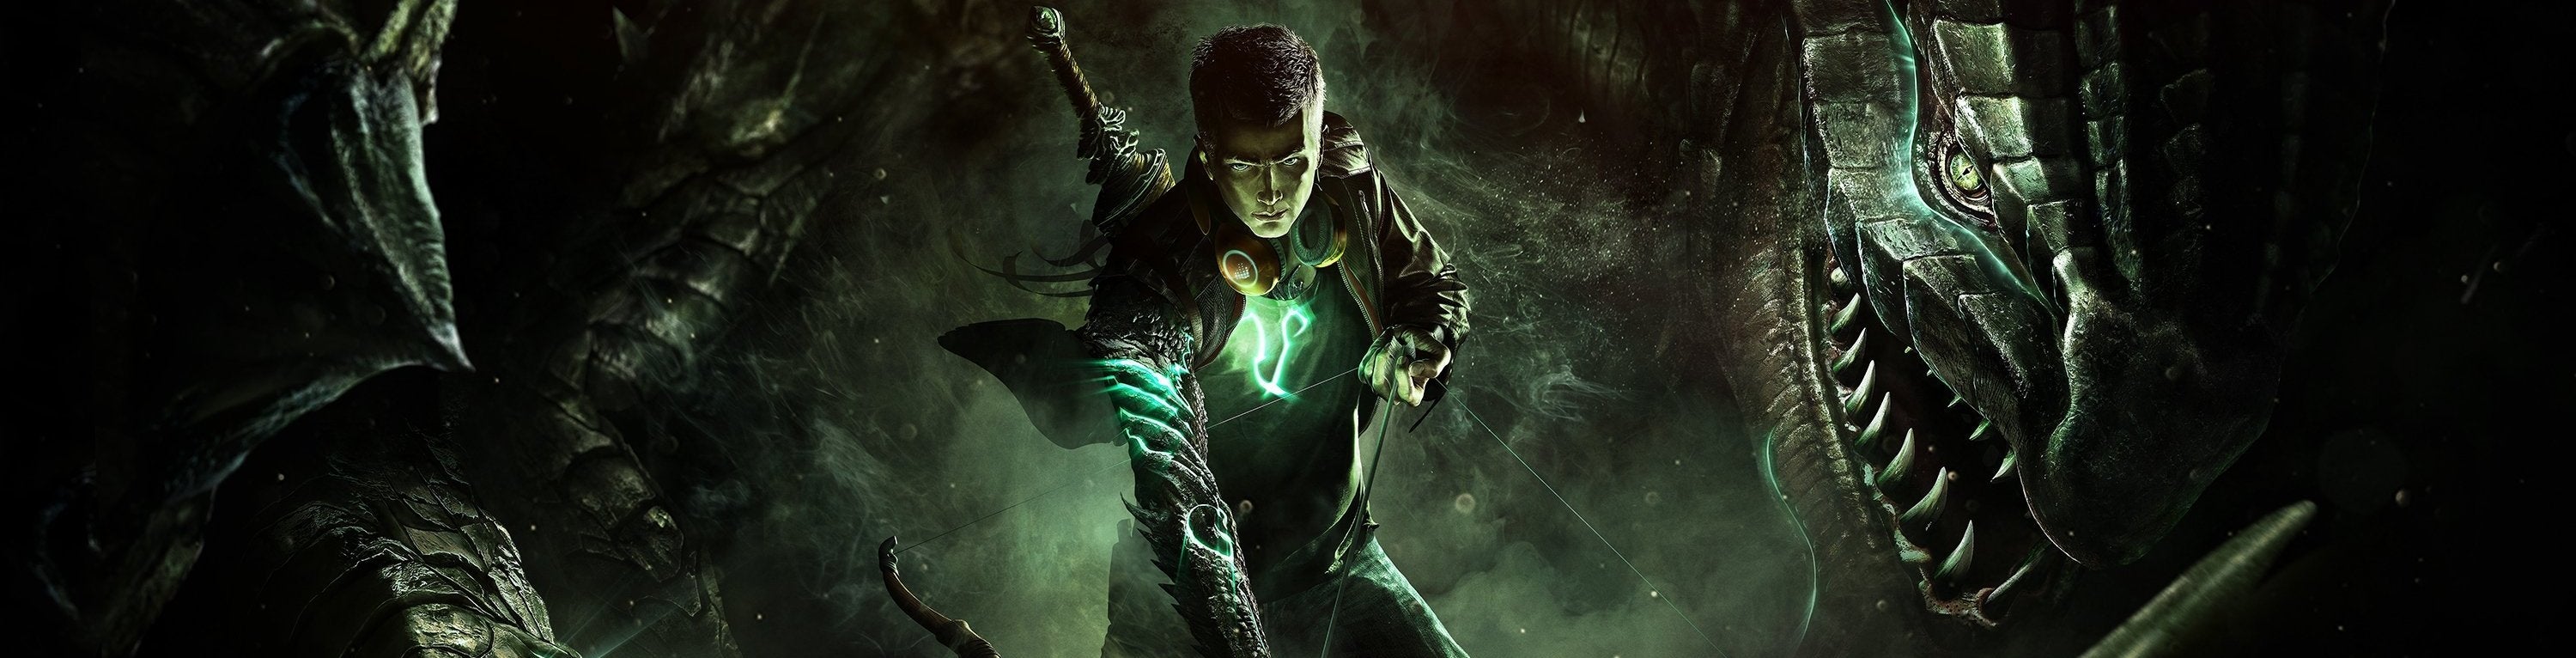 Image for Scalebound is unlike anything Platinum has done before